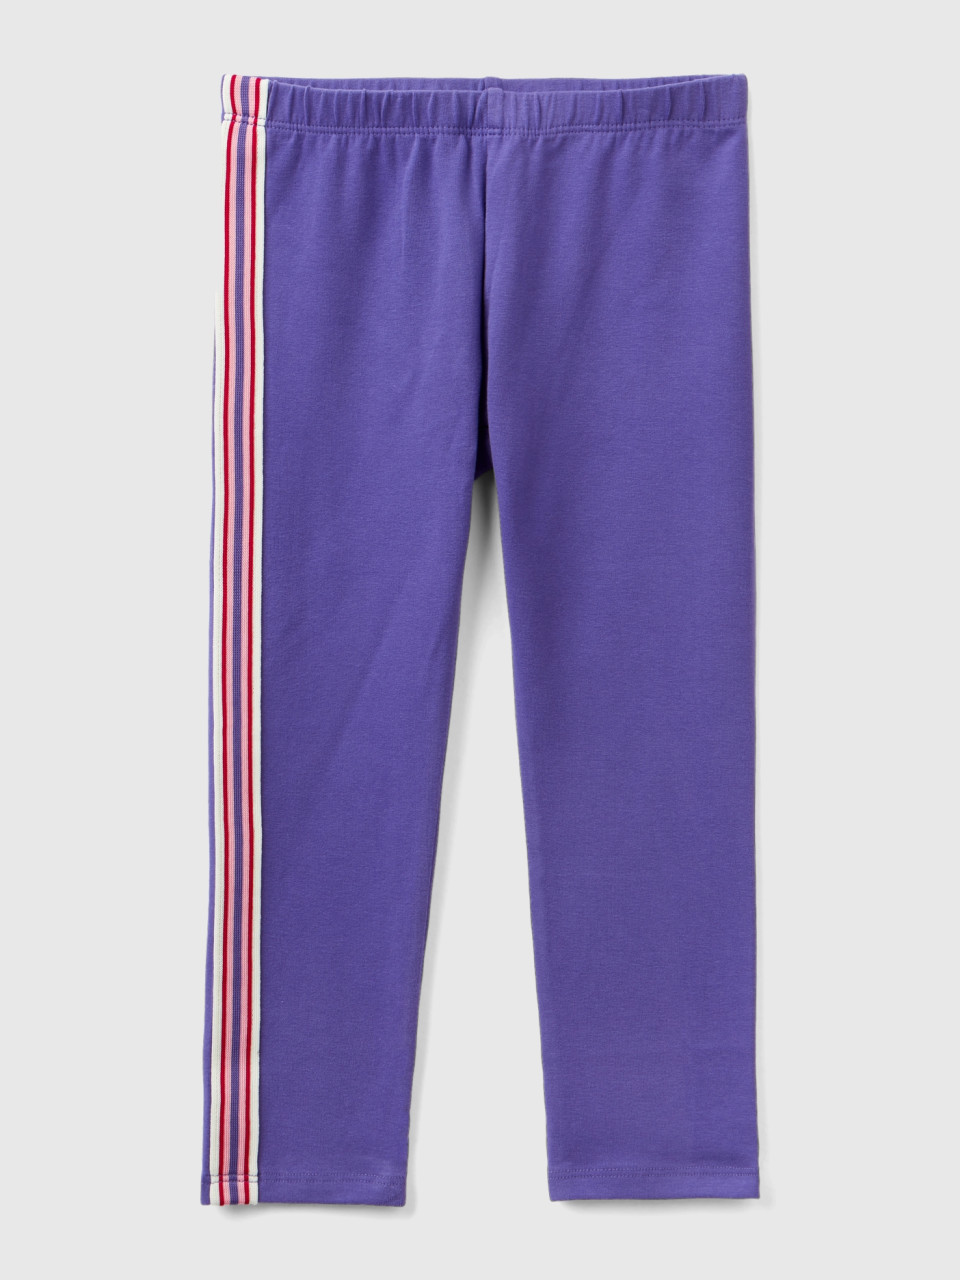 Benetton, Leggings With Ribbed Band, Violet, Kids